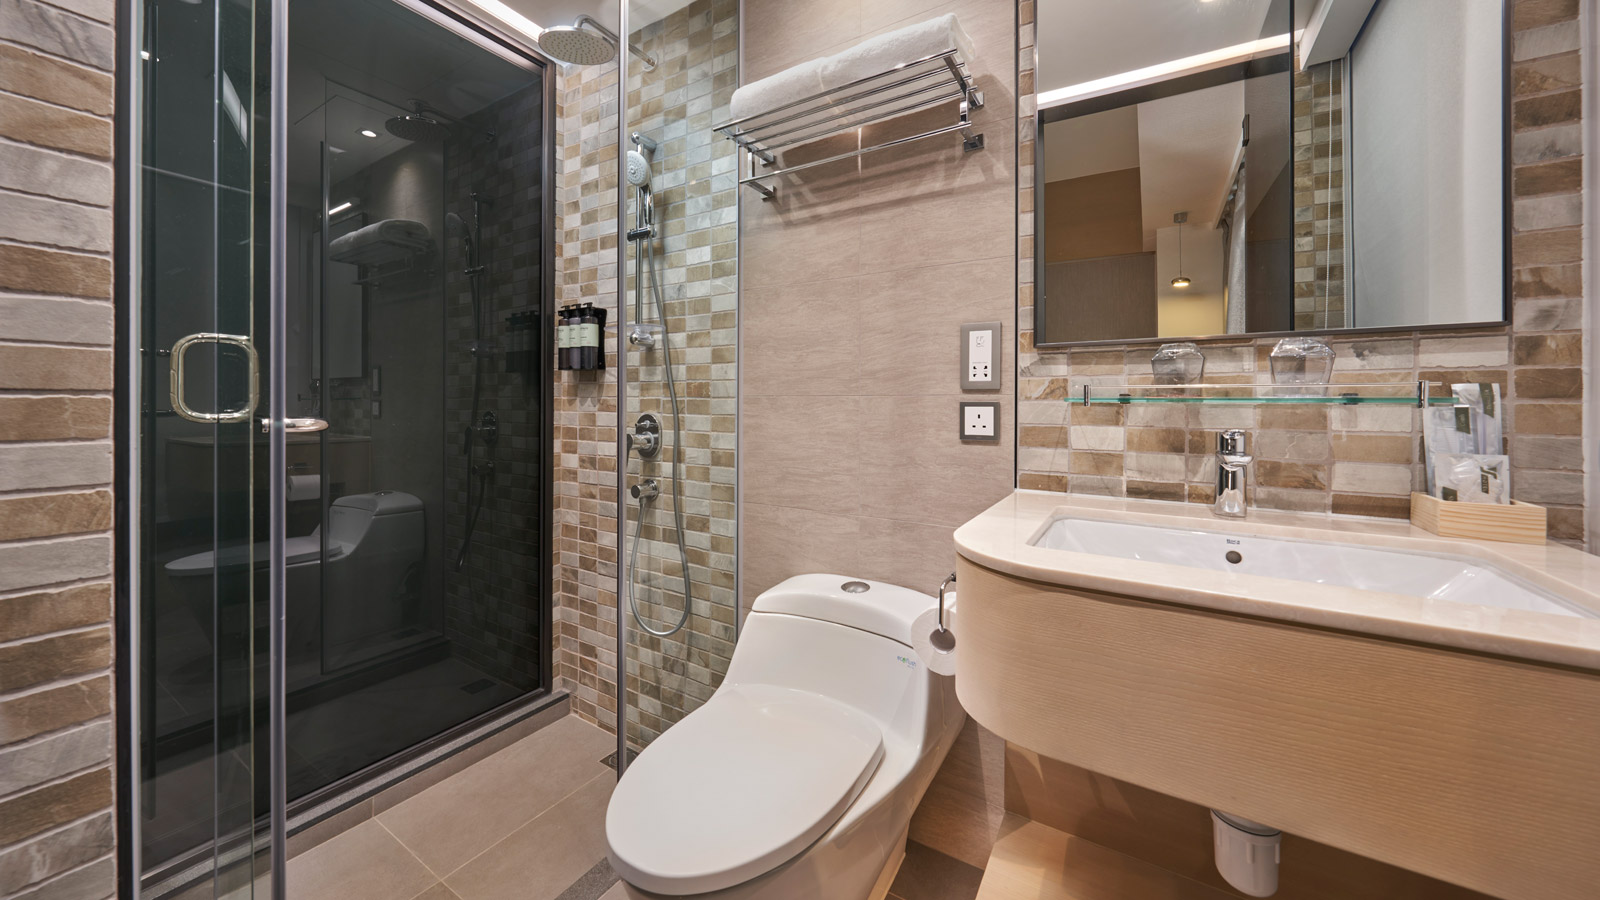 Deluxe Queen - Bathroom - Y Hotel Hong Kong (Images are a visual preview and may vary)